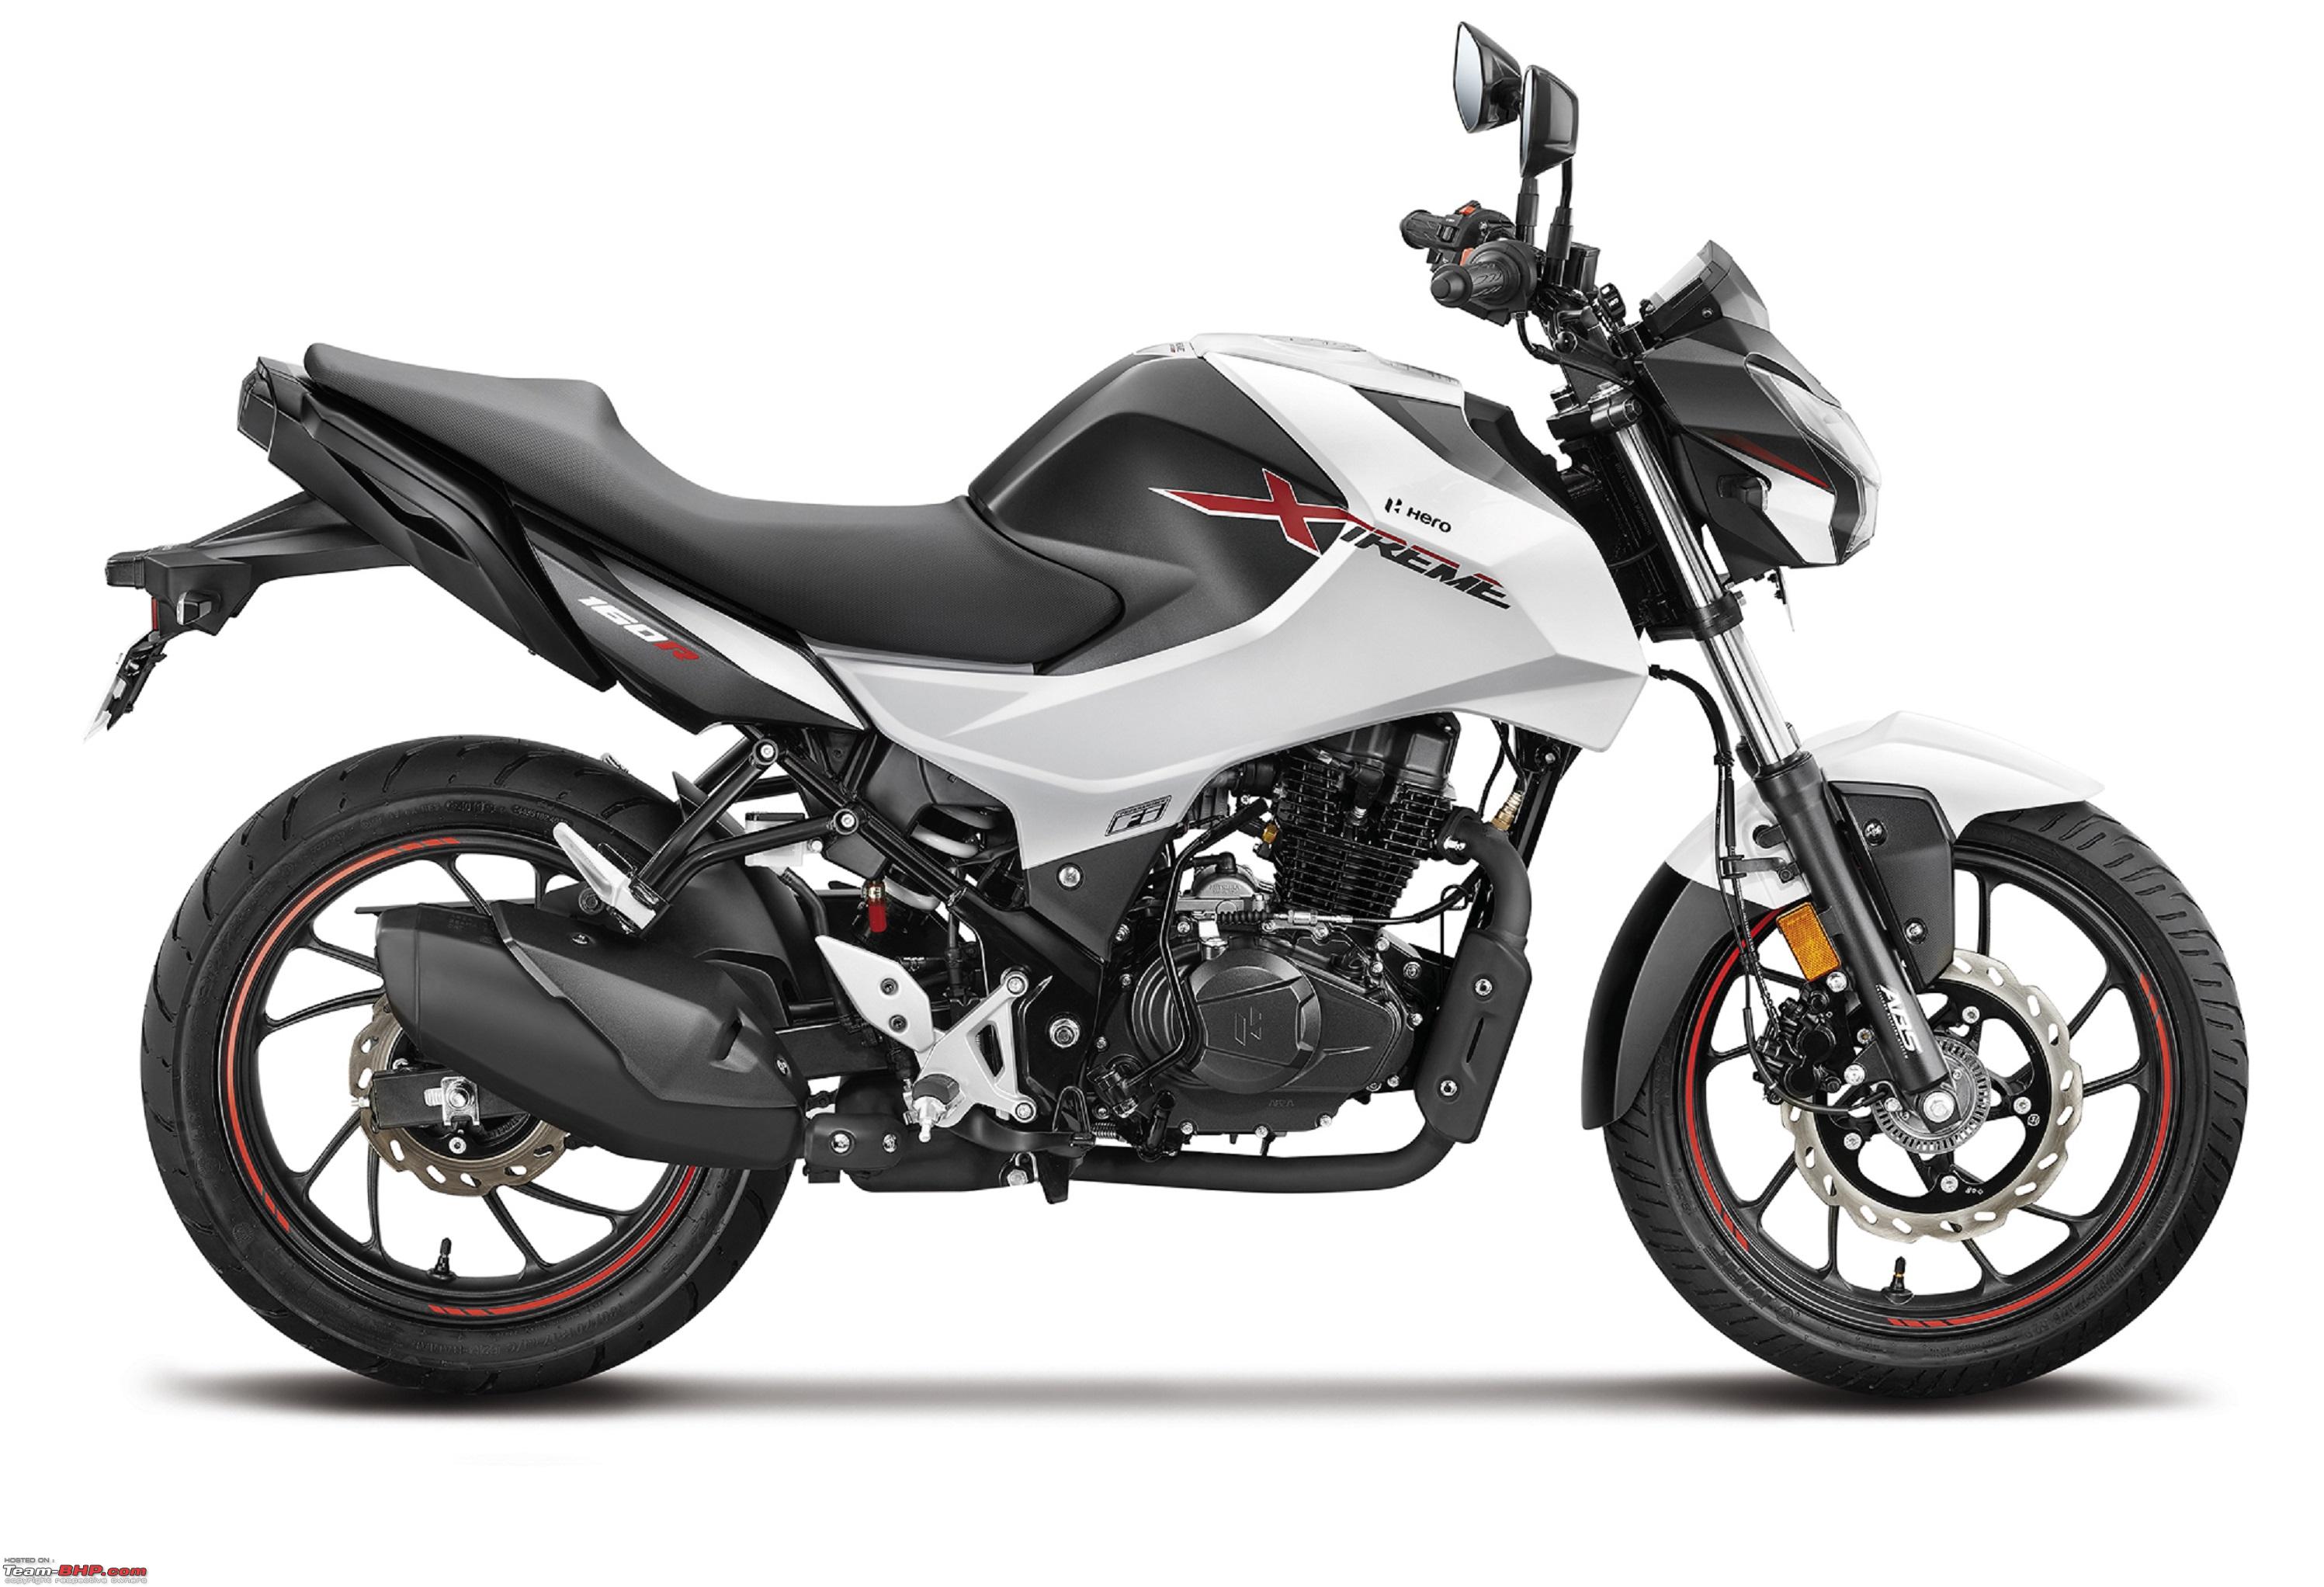 hero-xtreme-160r-launched-at-rs-99-950-team-bhp